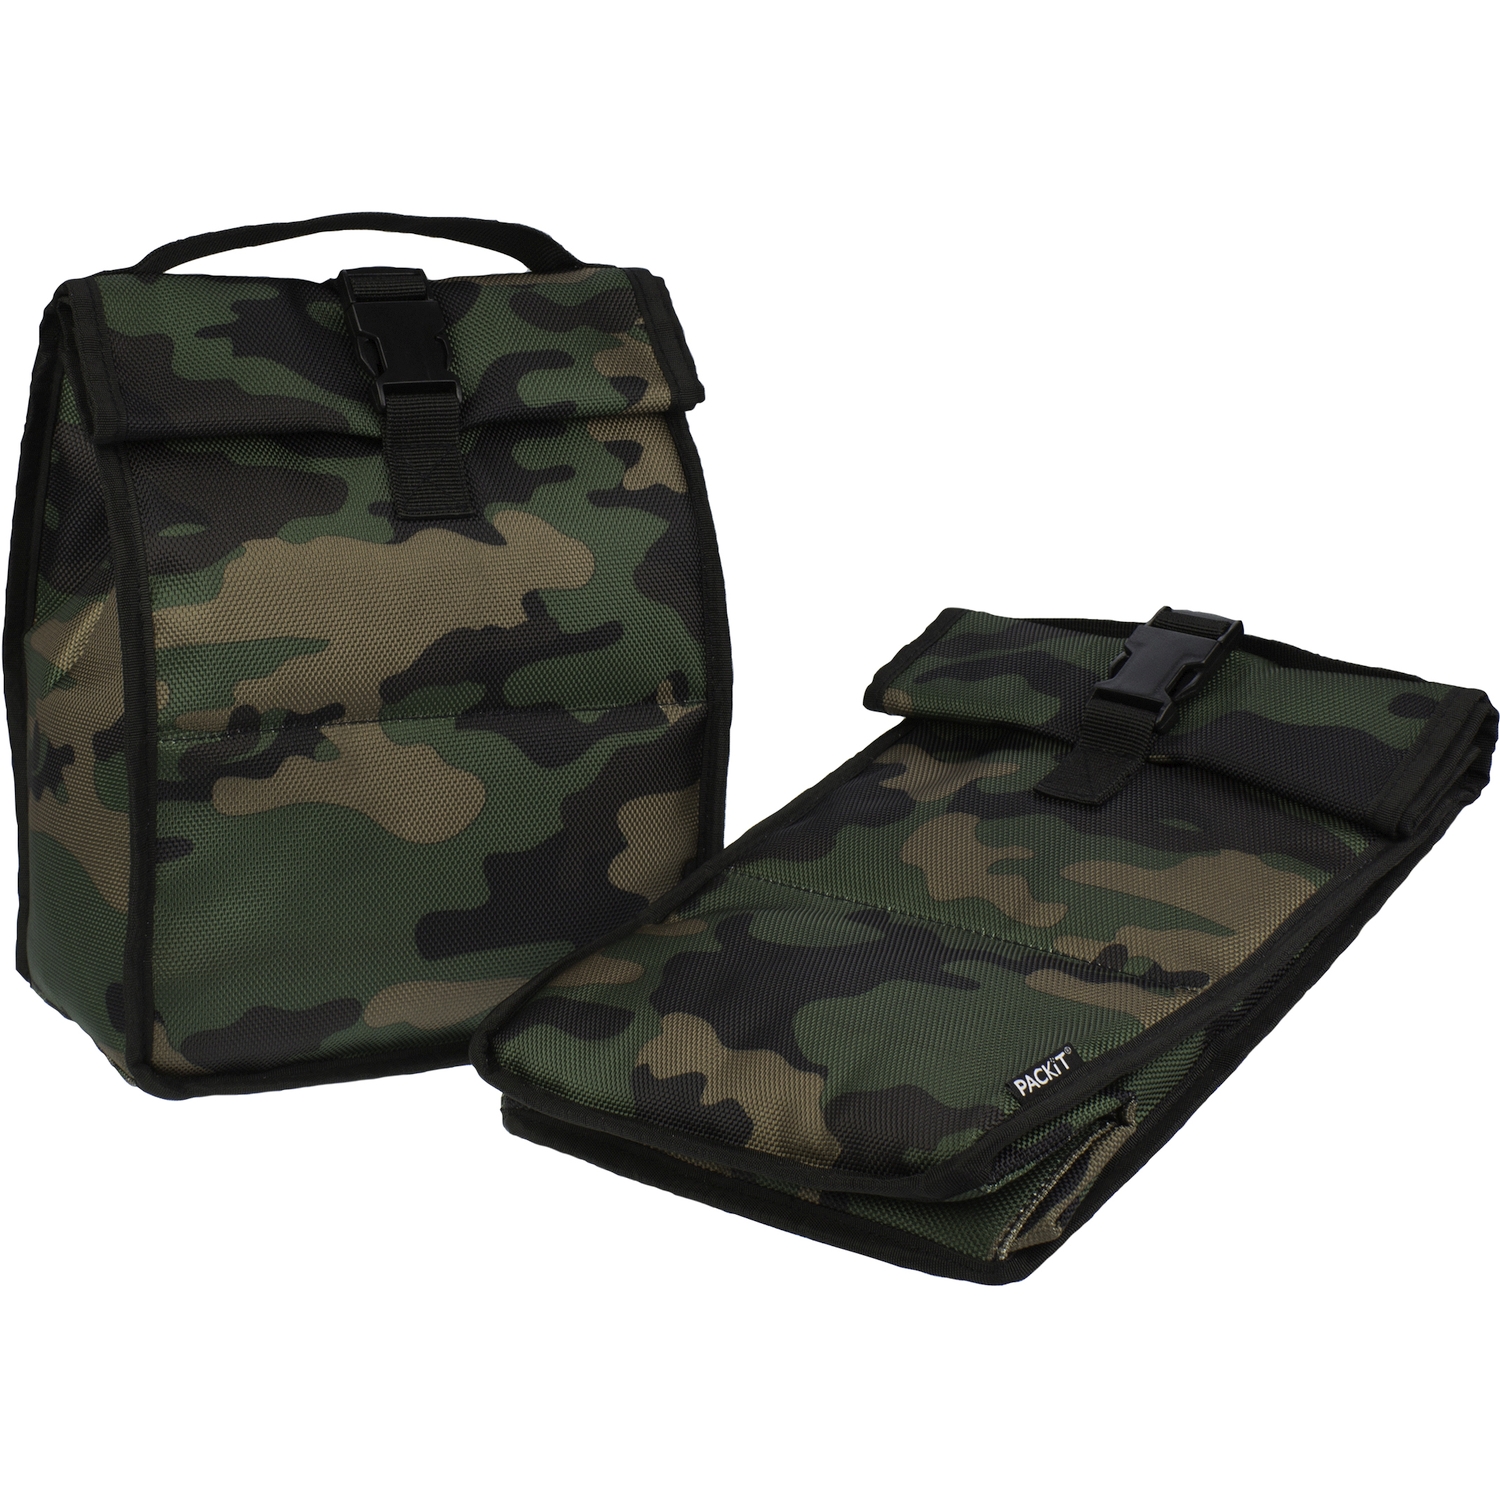     Roll Top Camo, 4.4  (PACKiT PACKIT0036)